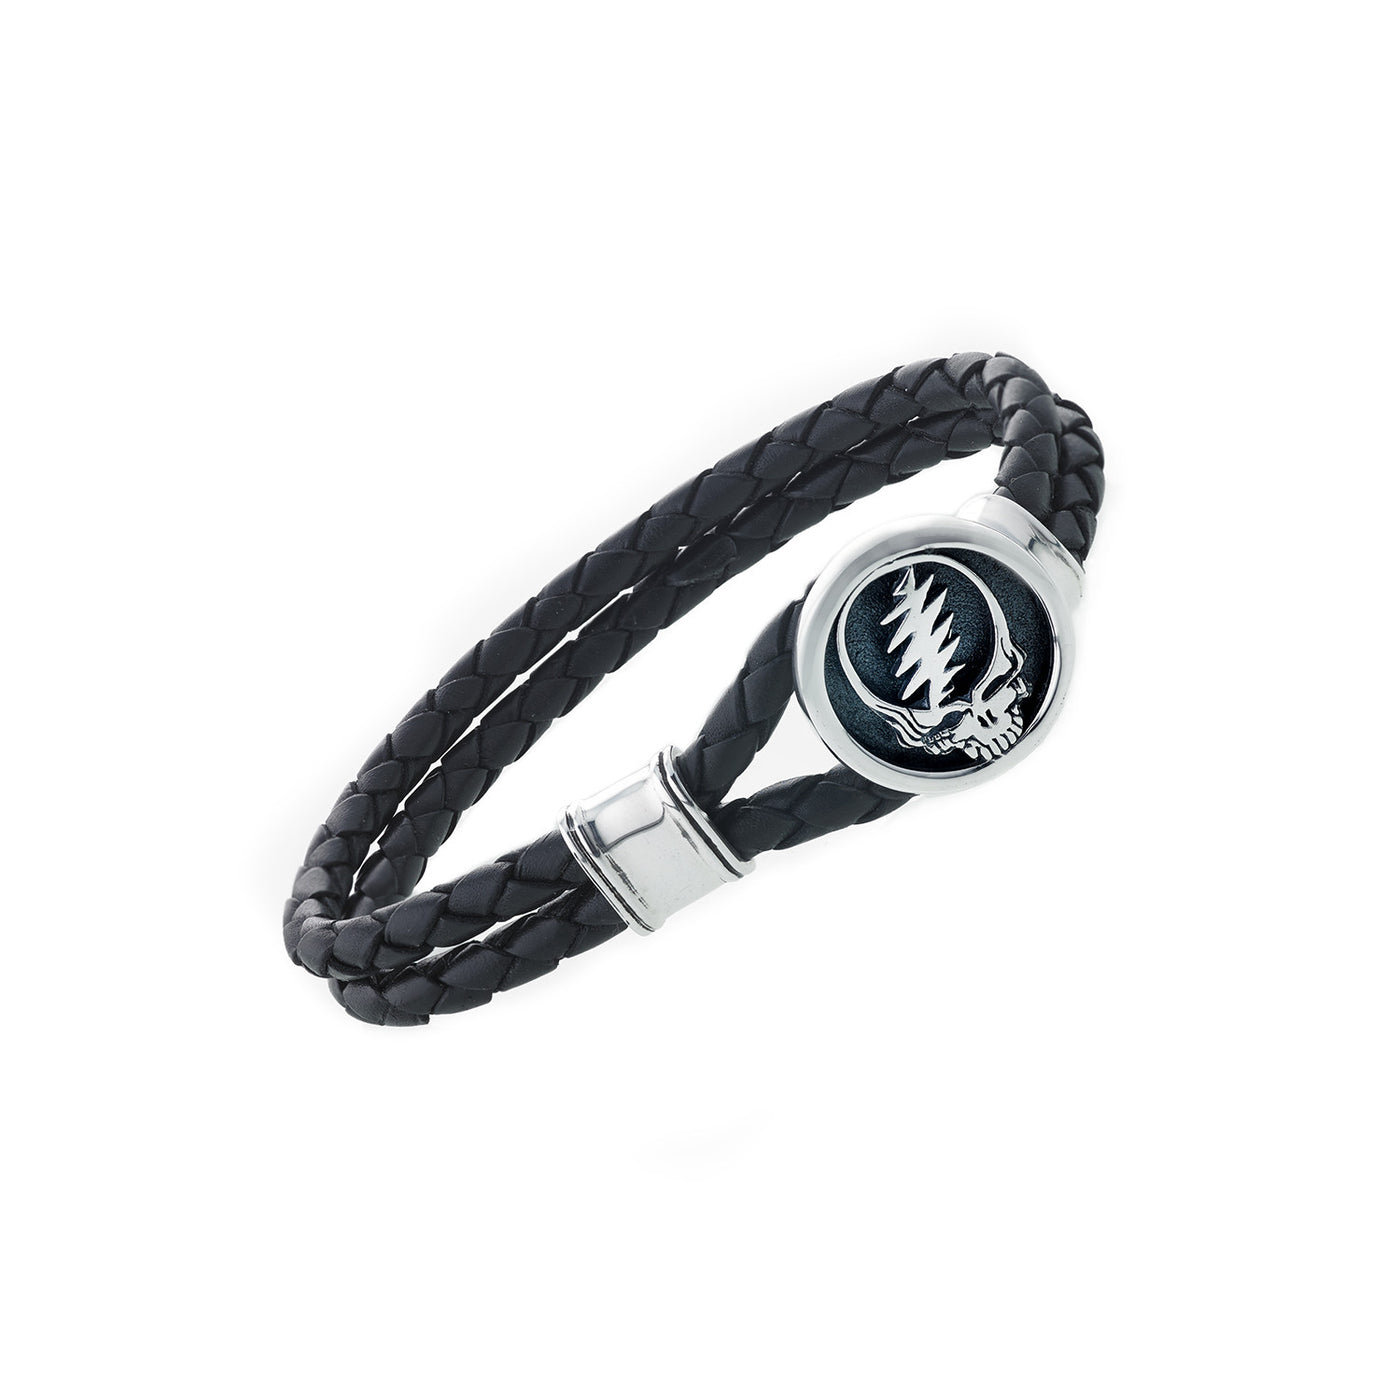 Steal Your Face Sterling Silver Leather Bracelet - Cynthia Gale New York - 1